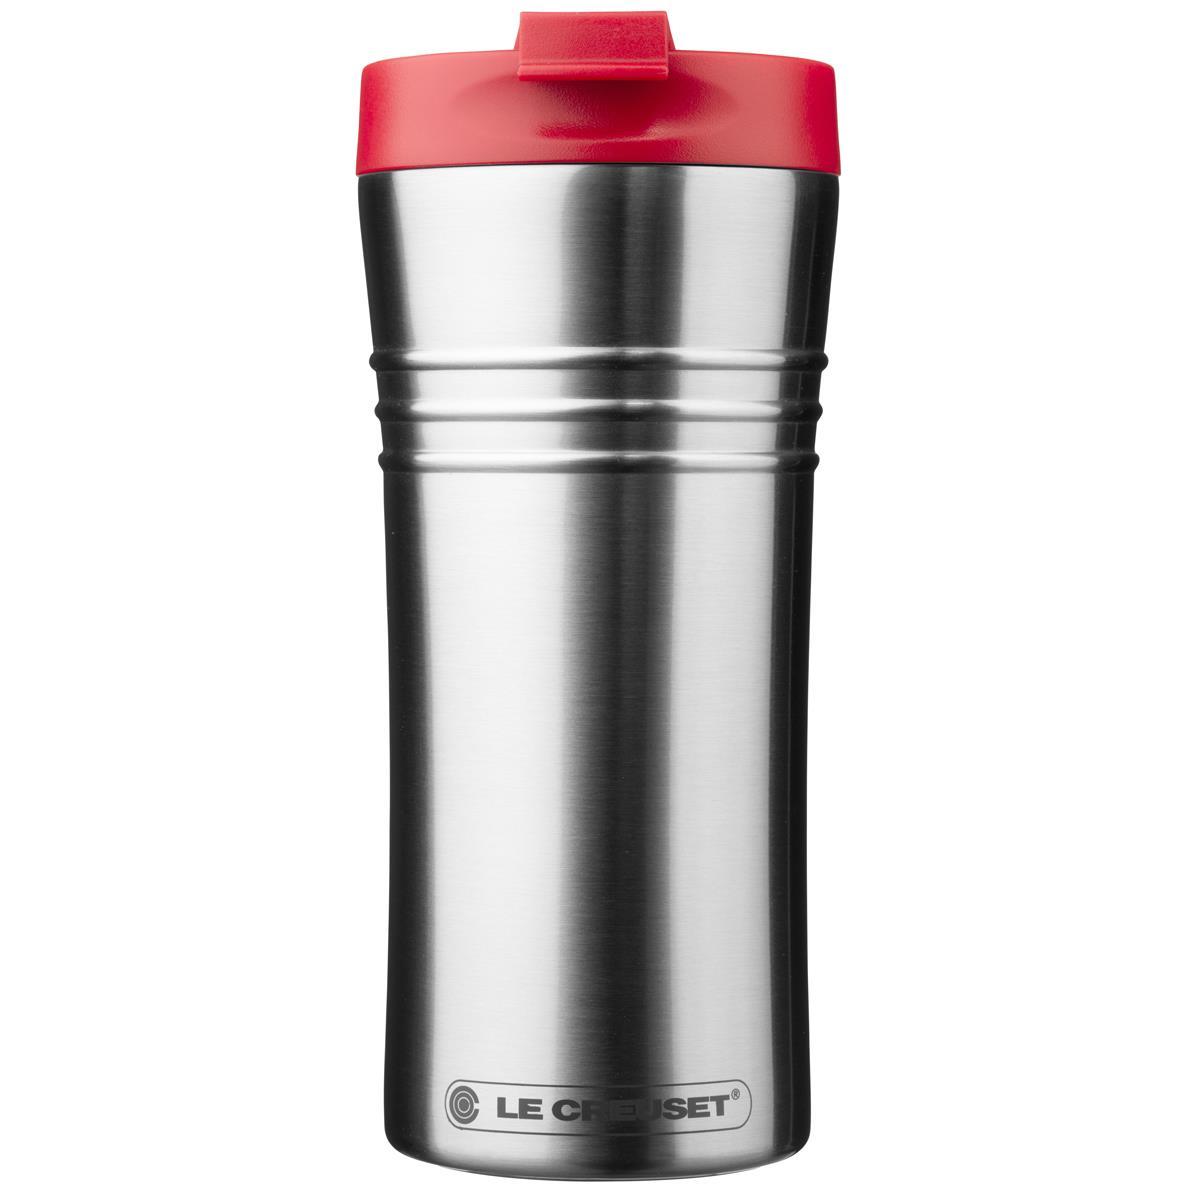 What is the capacity of the Le Creuset travel mug made of stainless steel?